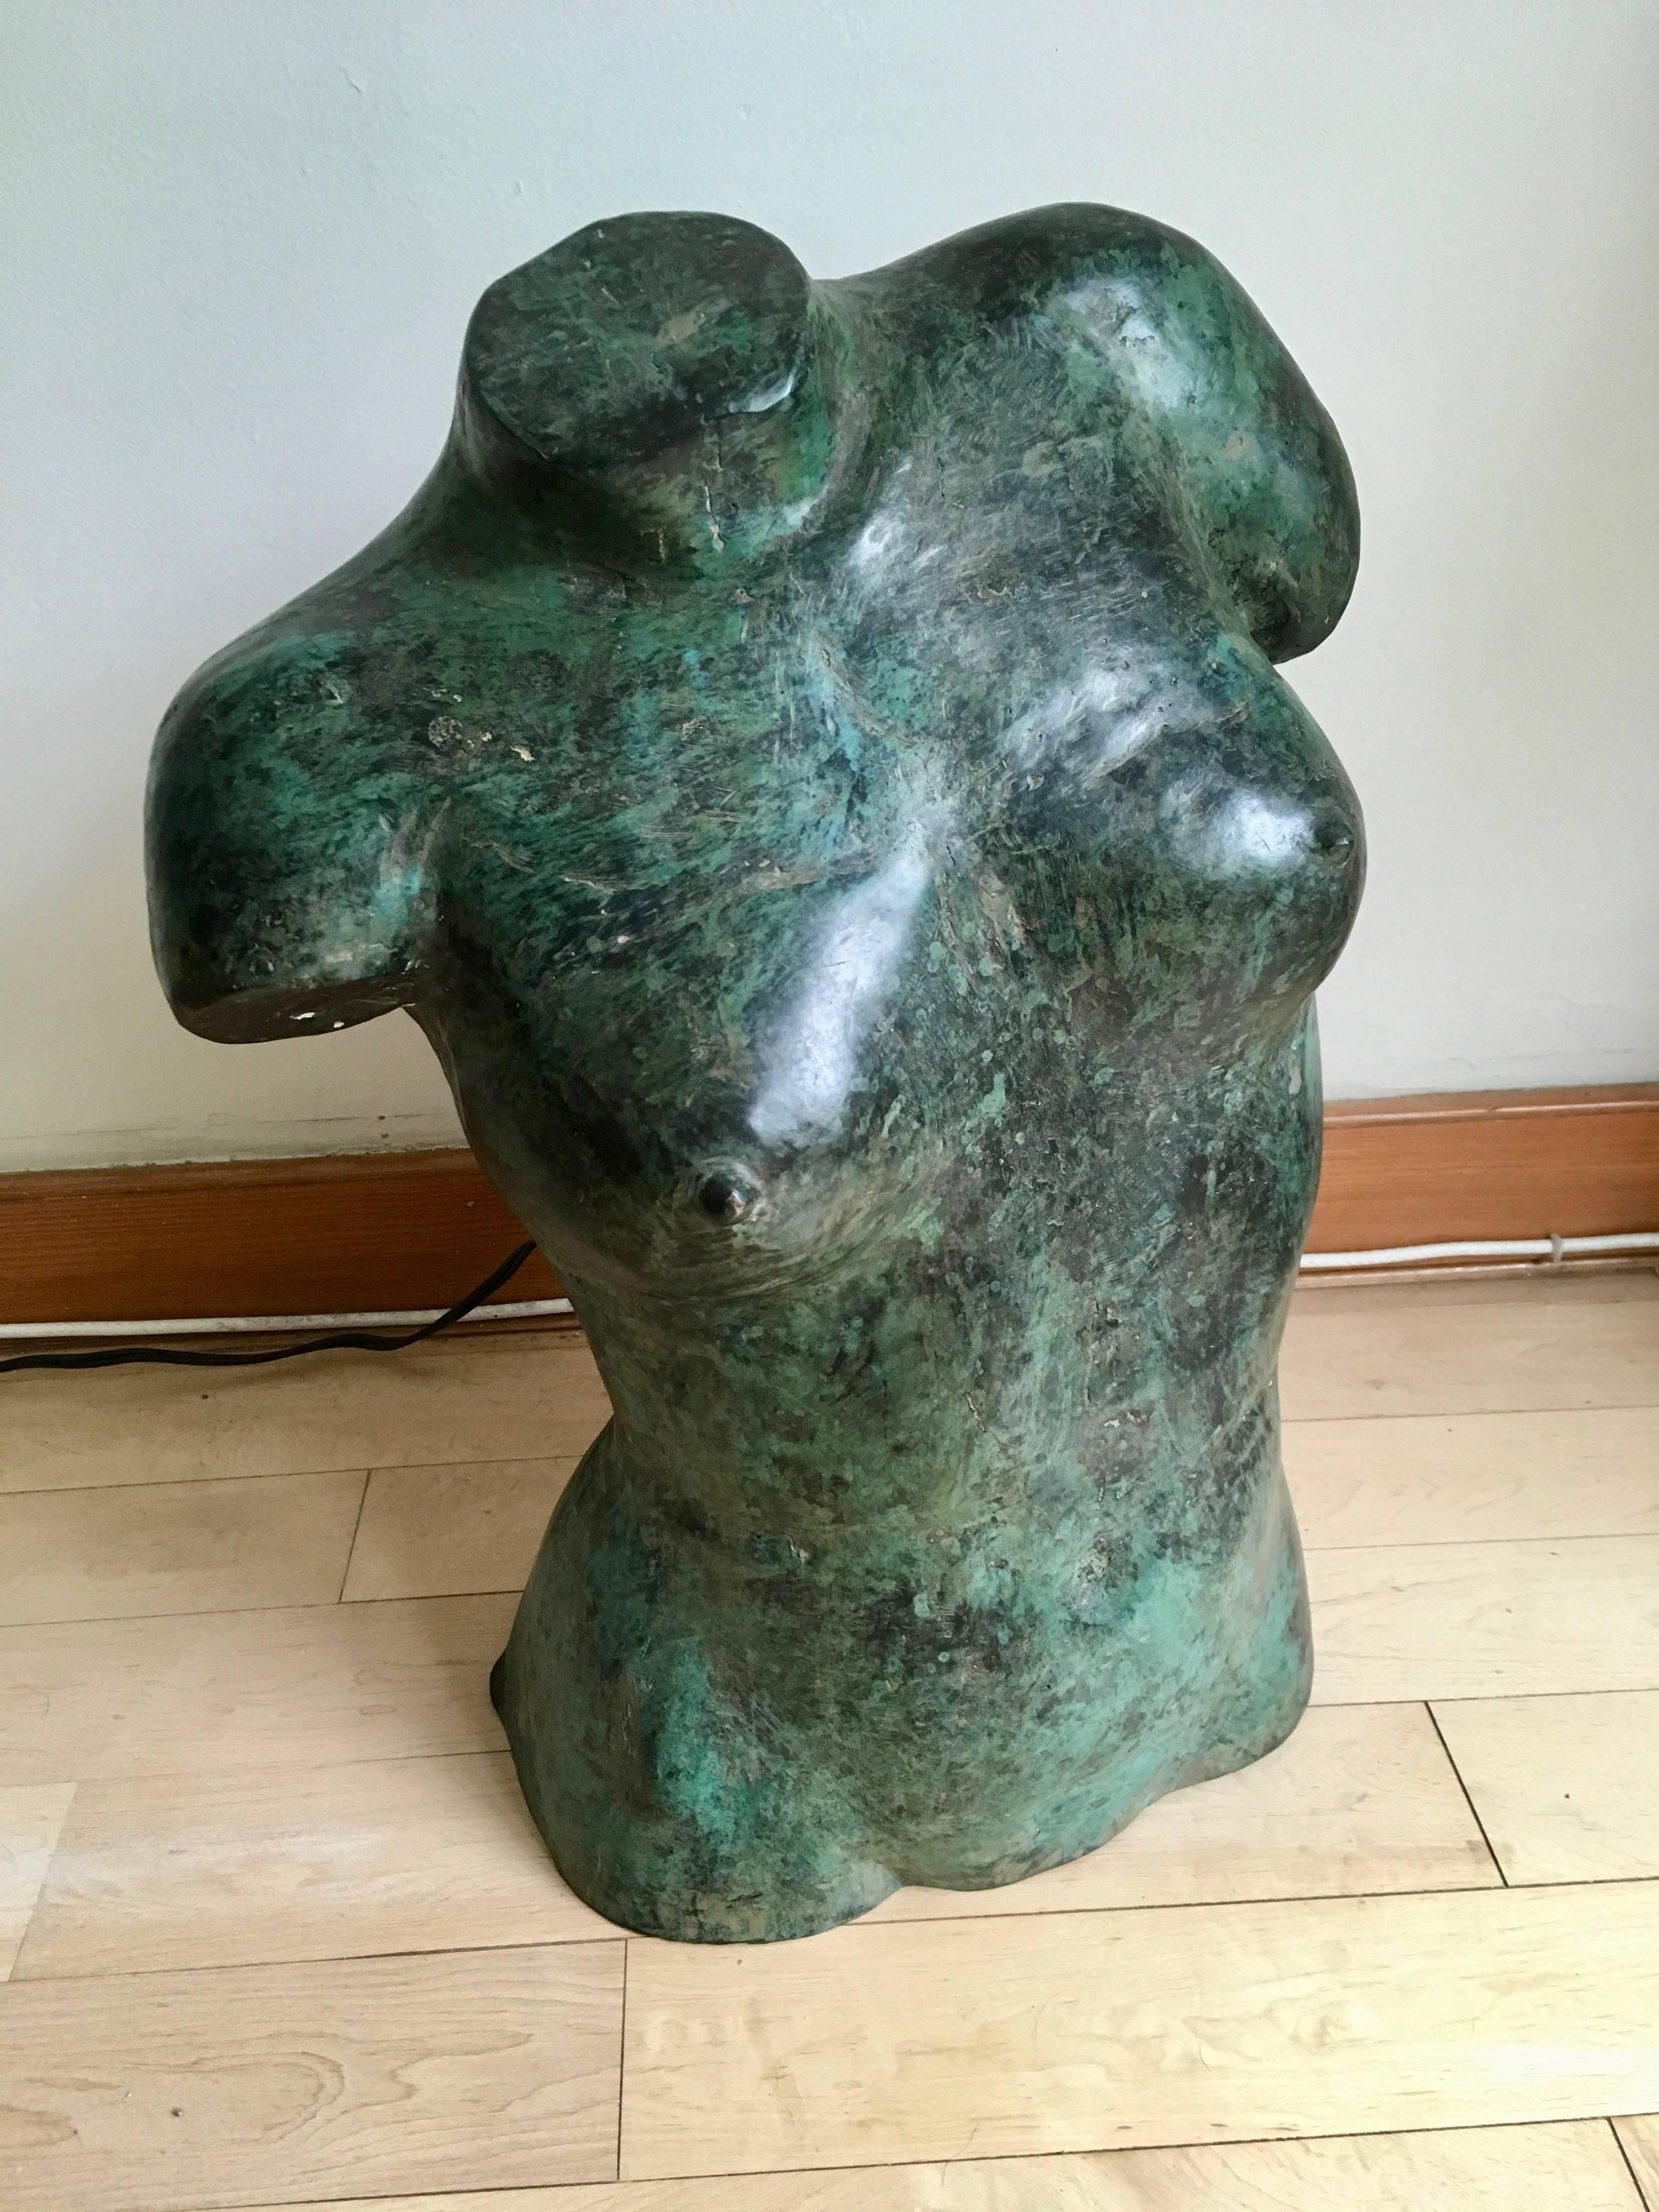 Stunning bronze bust from the 1970s. Stunning patina to bronze. Excellent condition. Impactful piece of art.